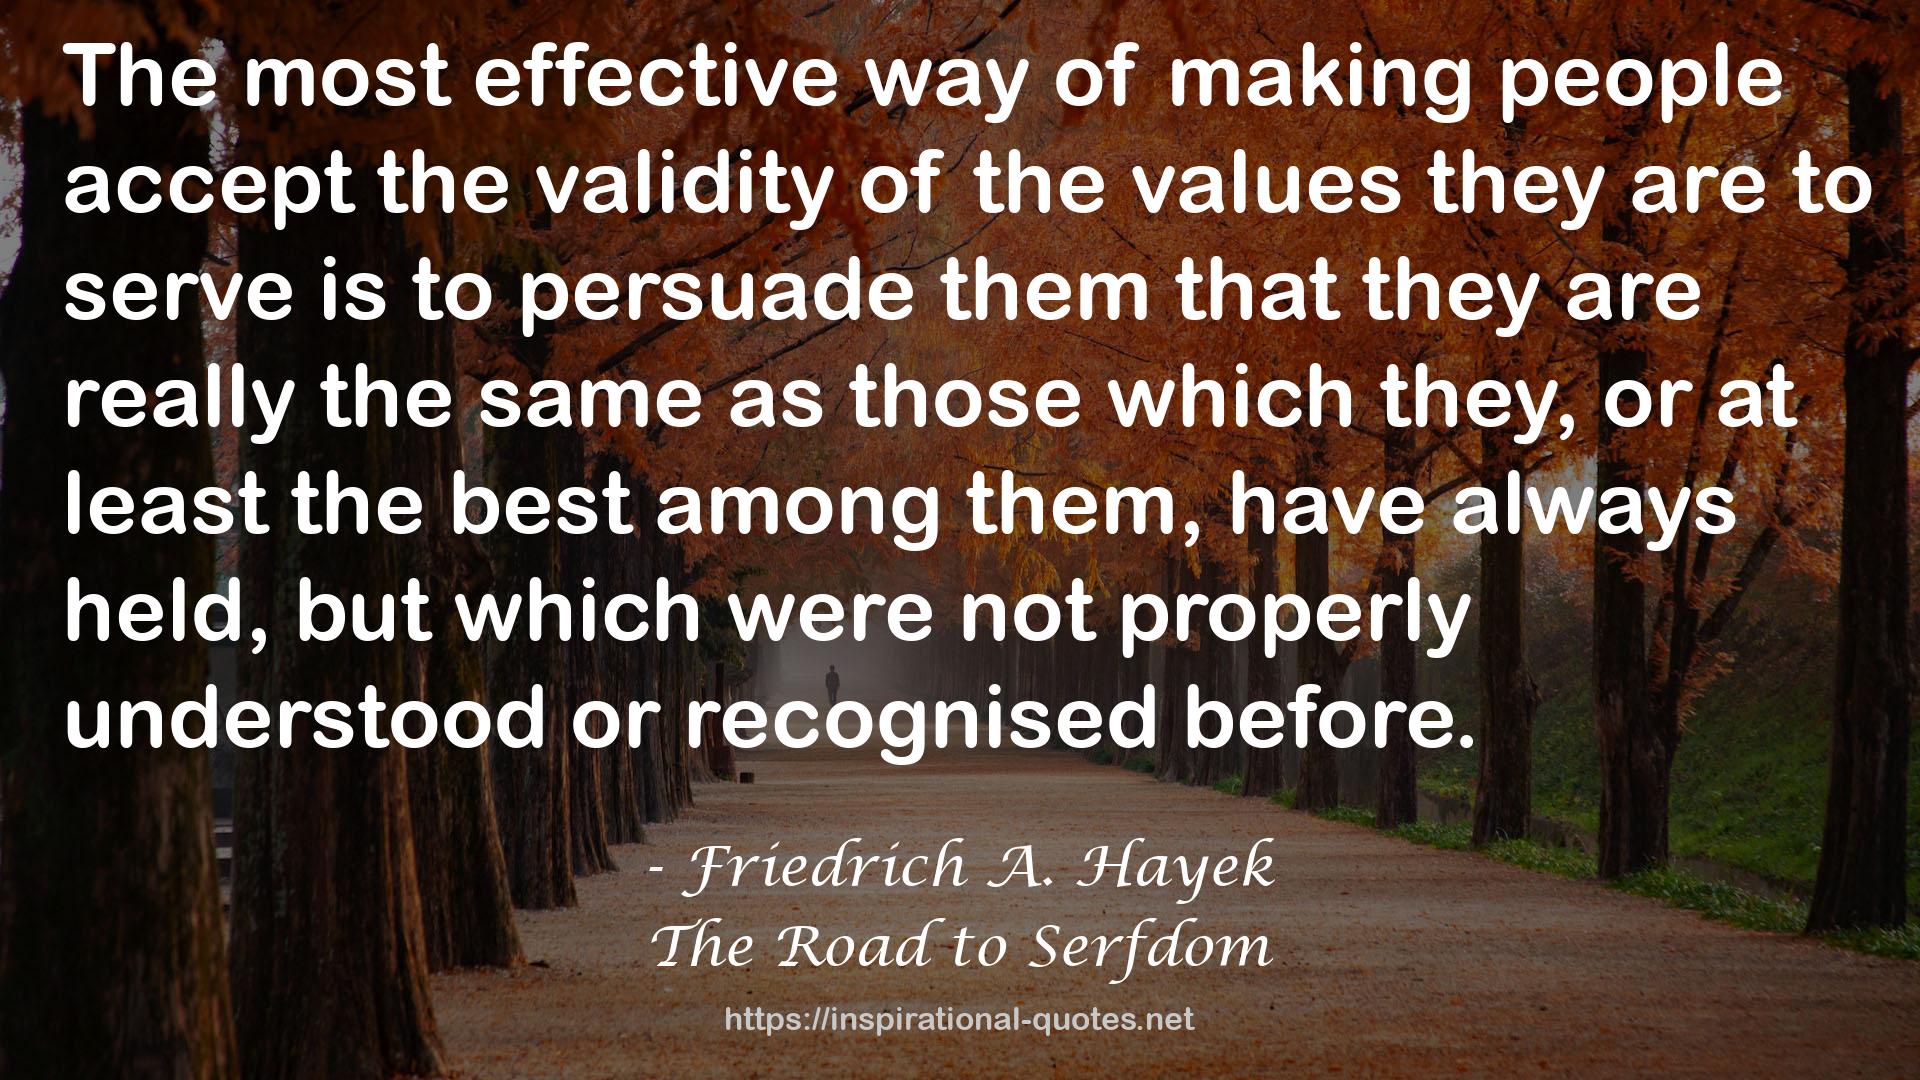 The Road to Serfdom QUOTES